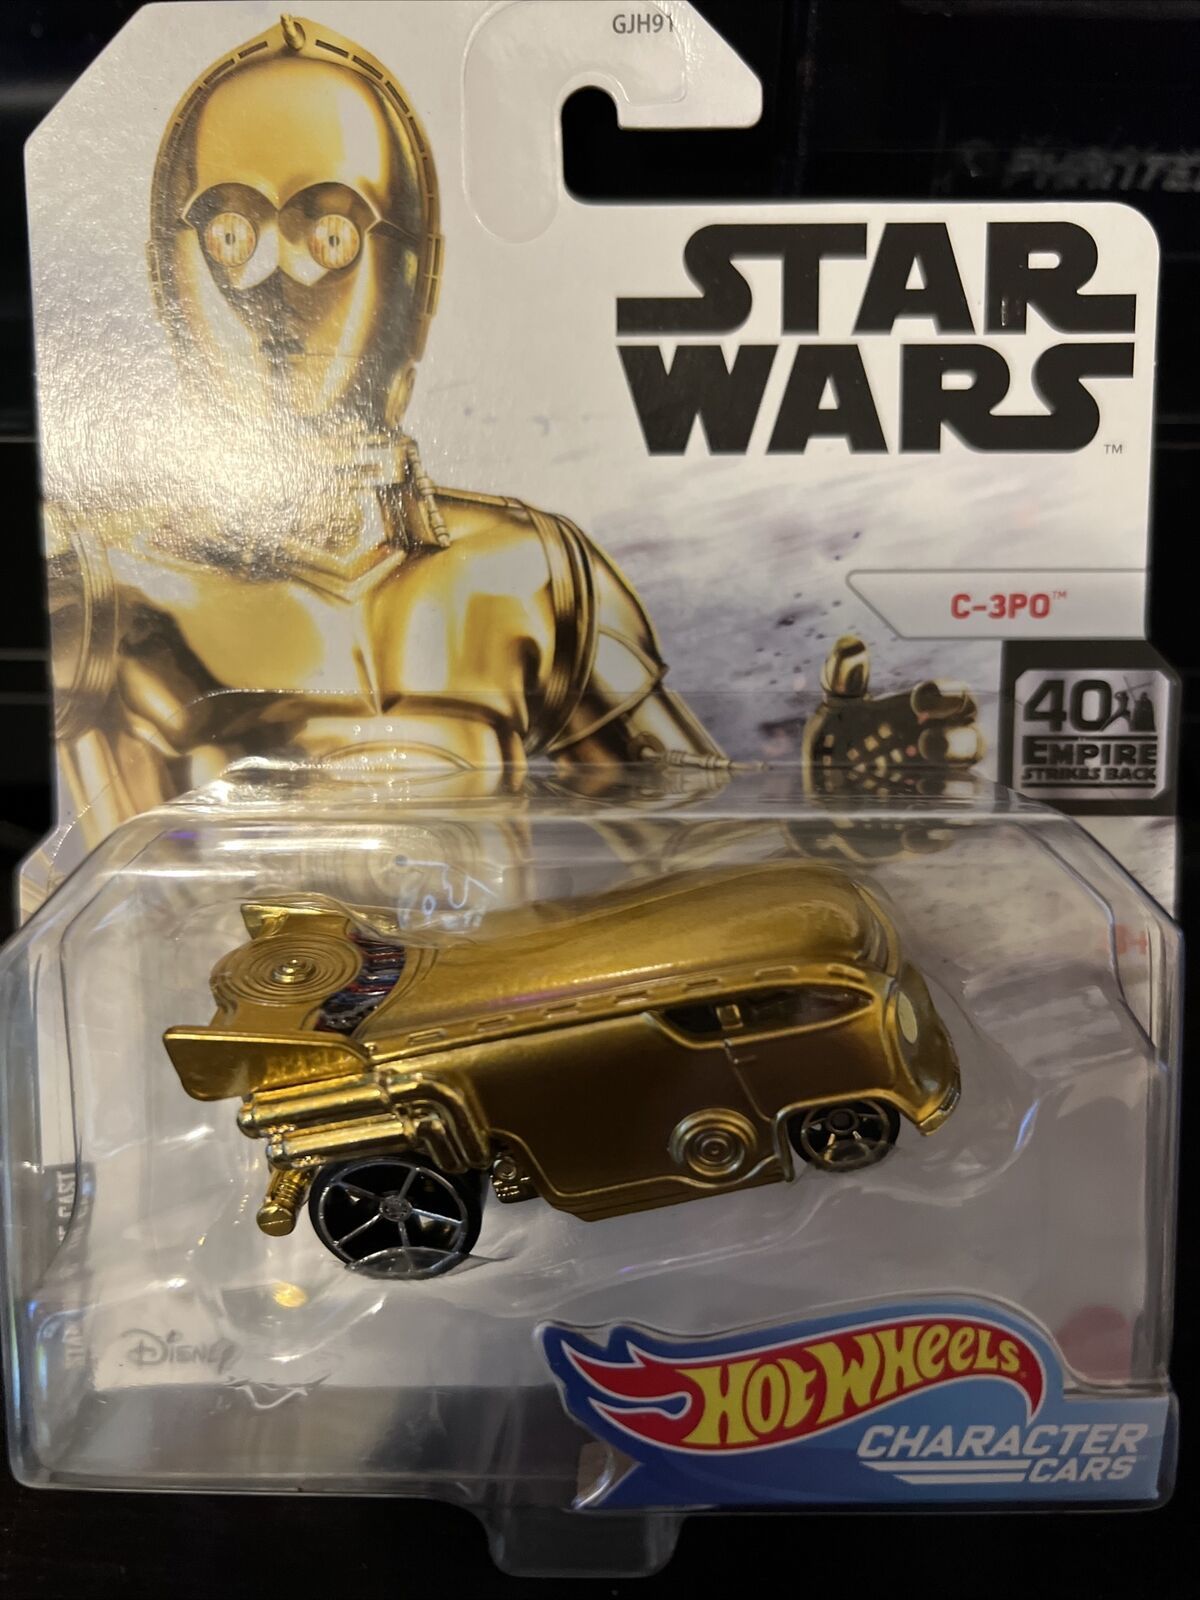 Primary image for Hot Wheels Star Wars: The Empire Strikes Back- C-3PO Character Car (2020)